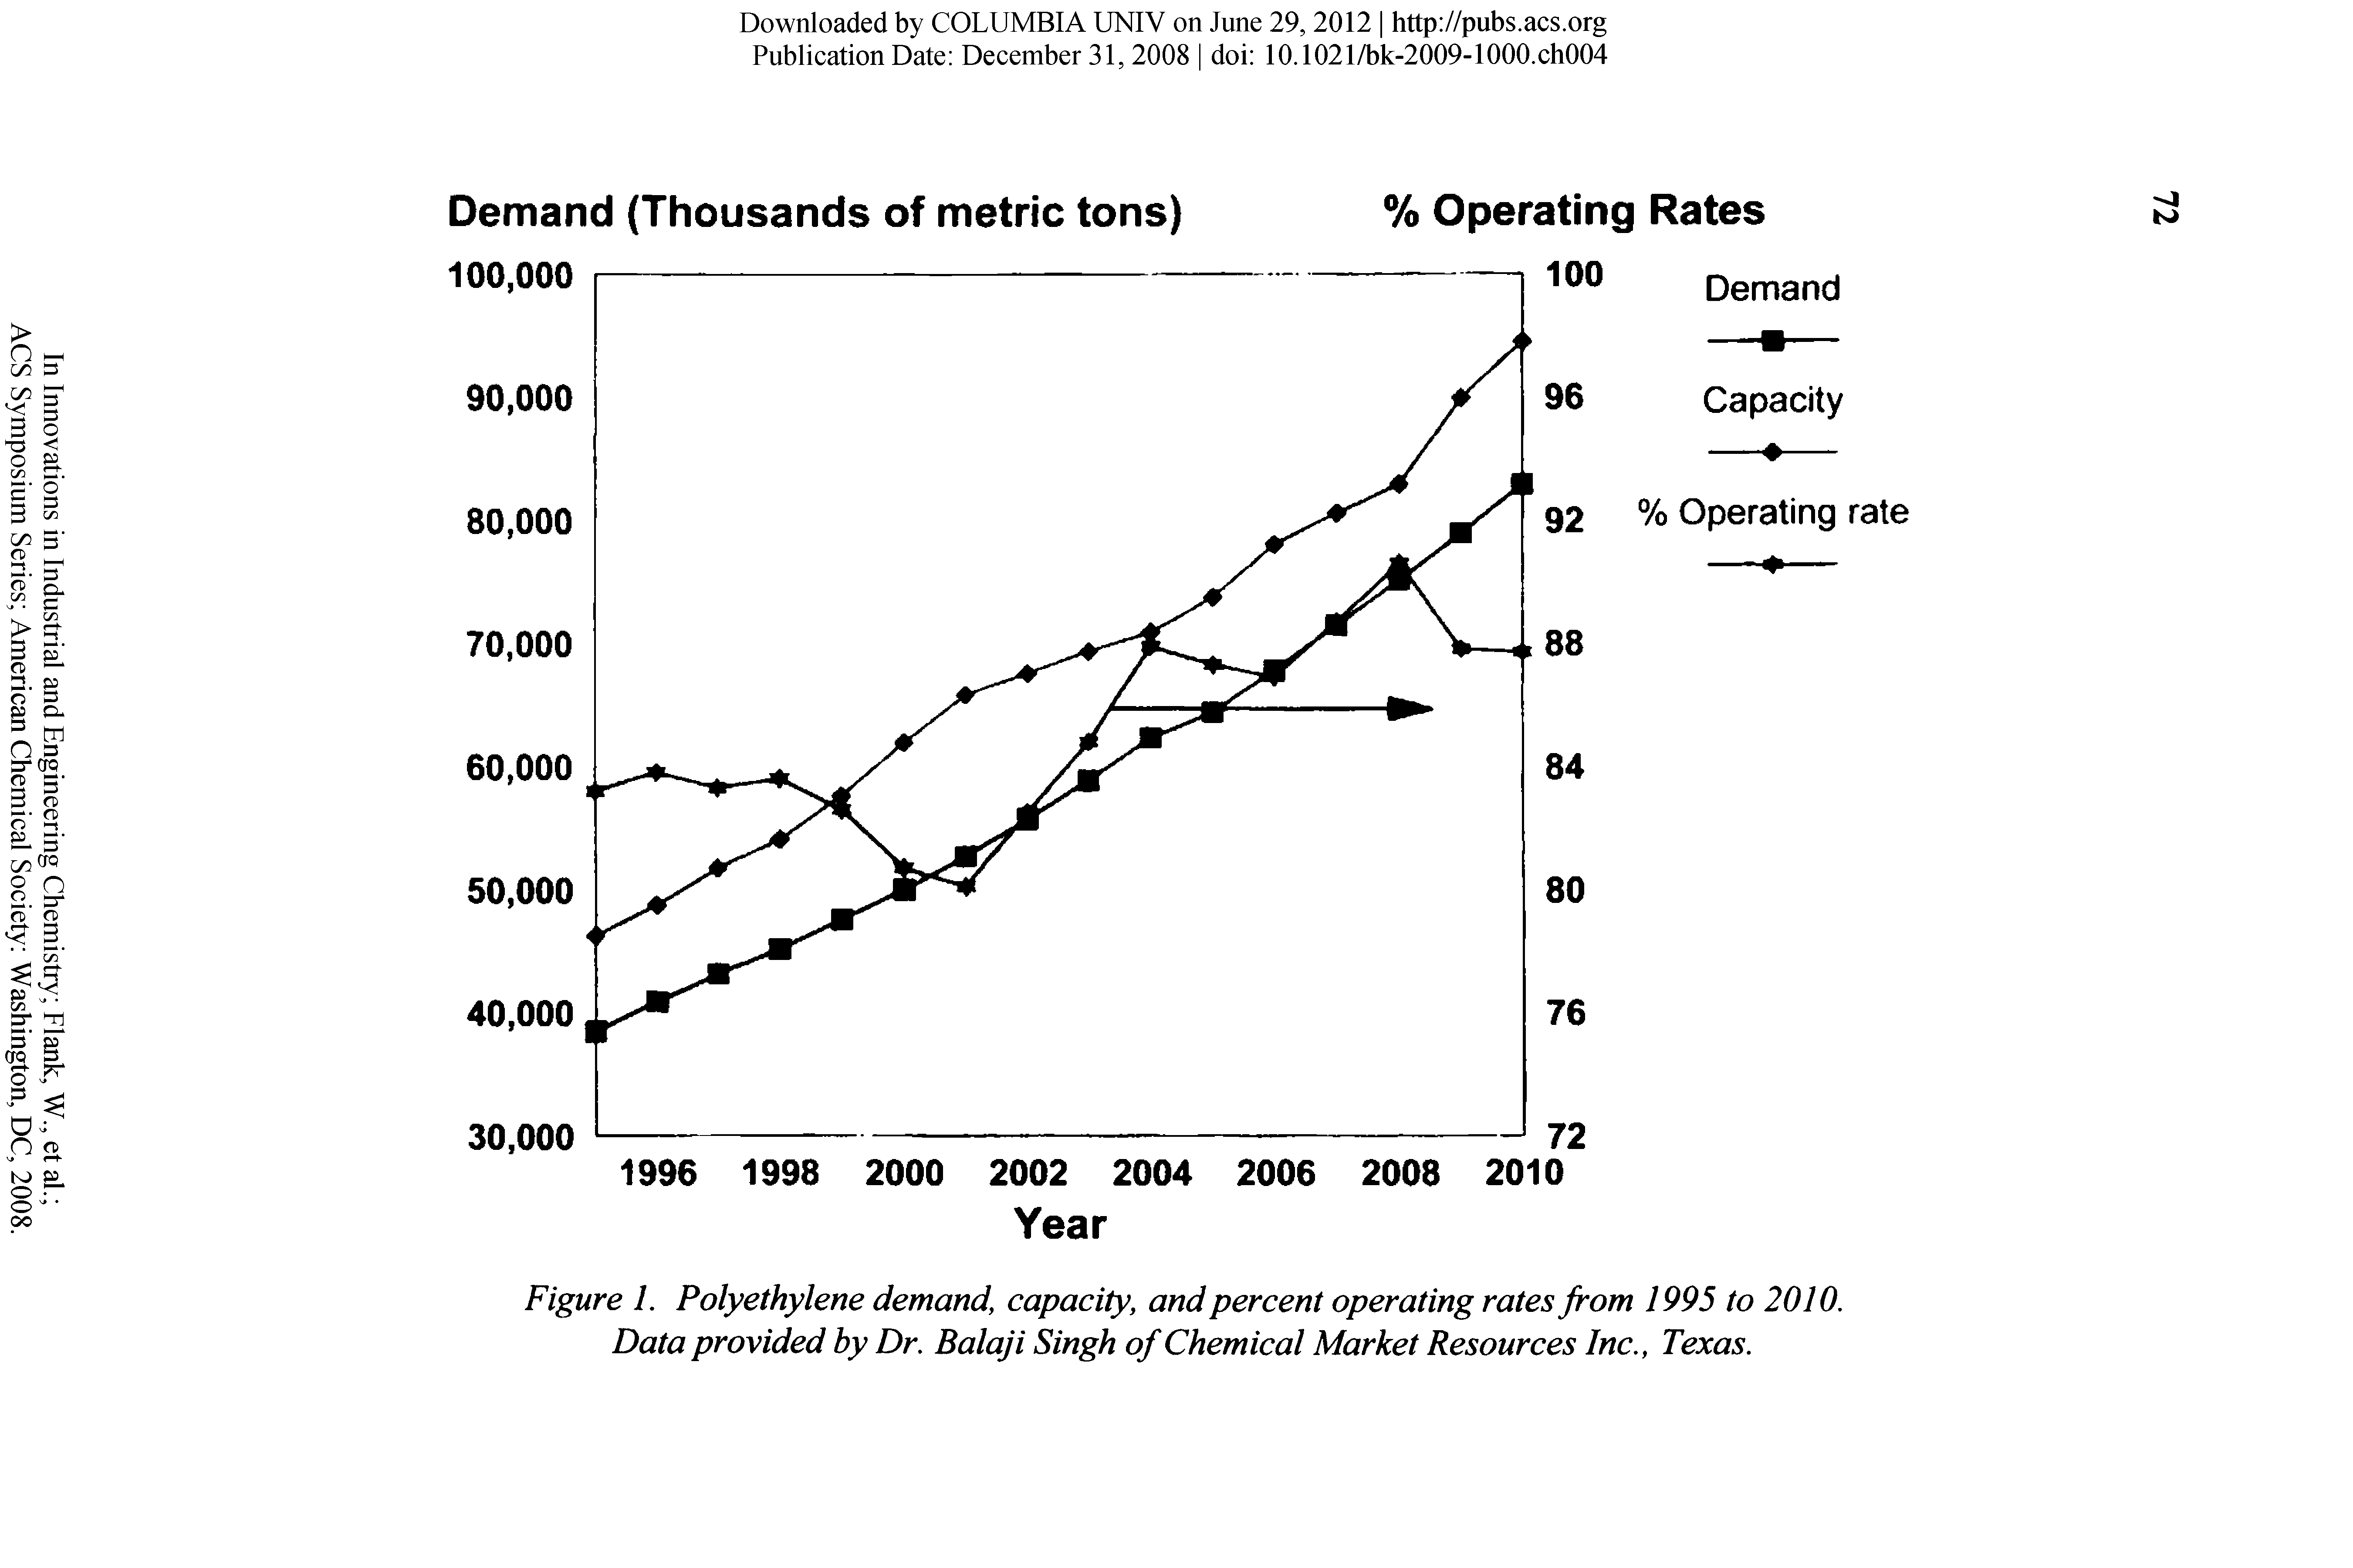 Figure 1. Polyethylene demand, capacity, and percent operating rates from 1995 to 2010. Data provided by Dr. Balaji Singh of Chemical Market Resources Inc., Texas.